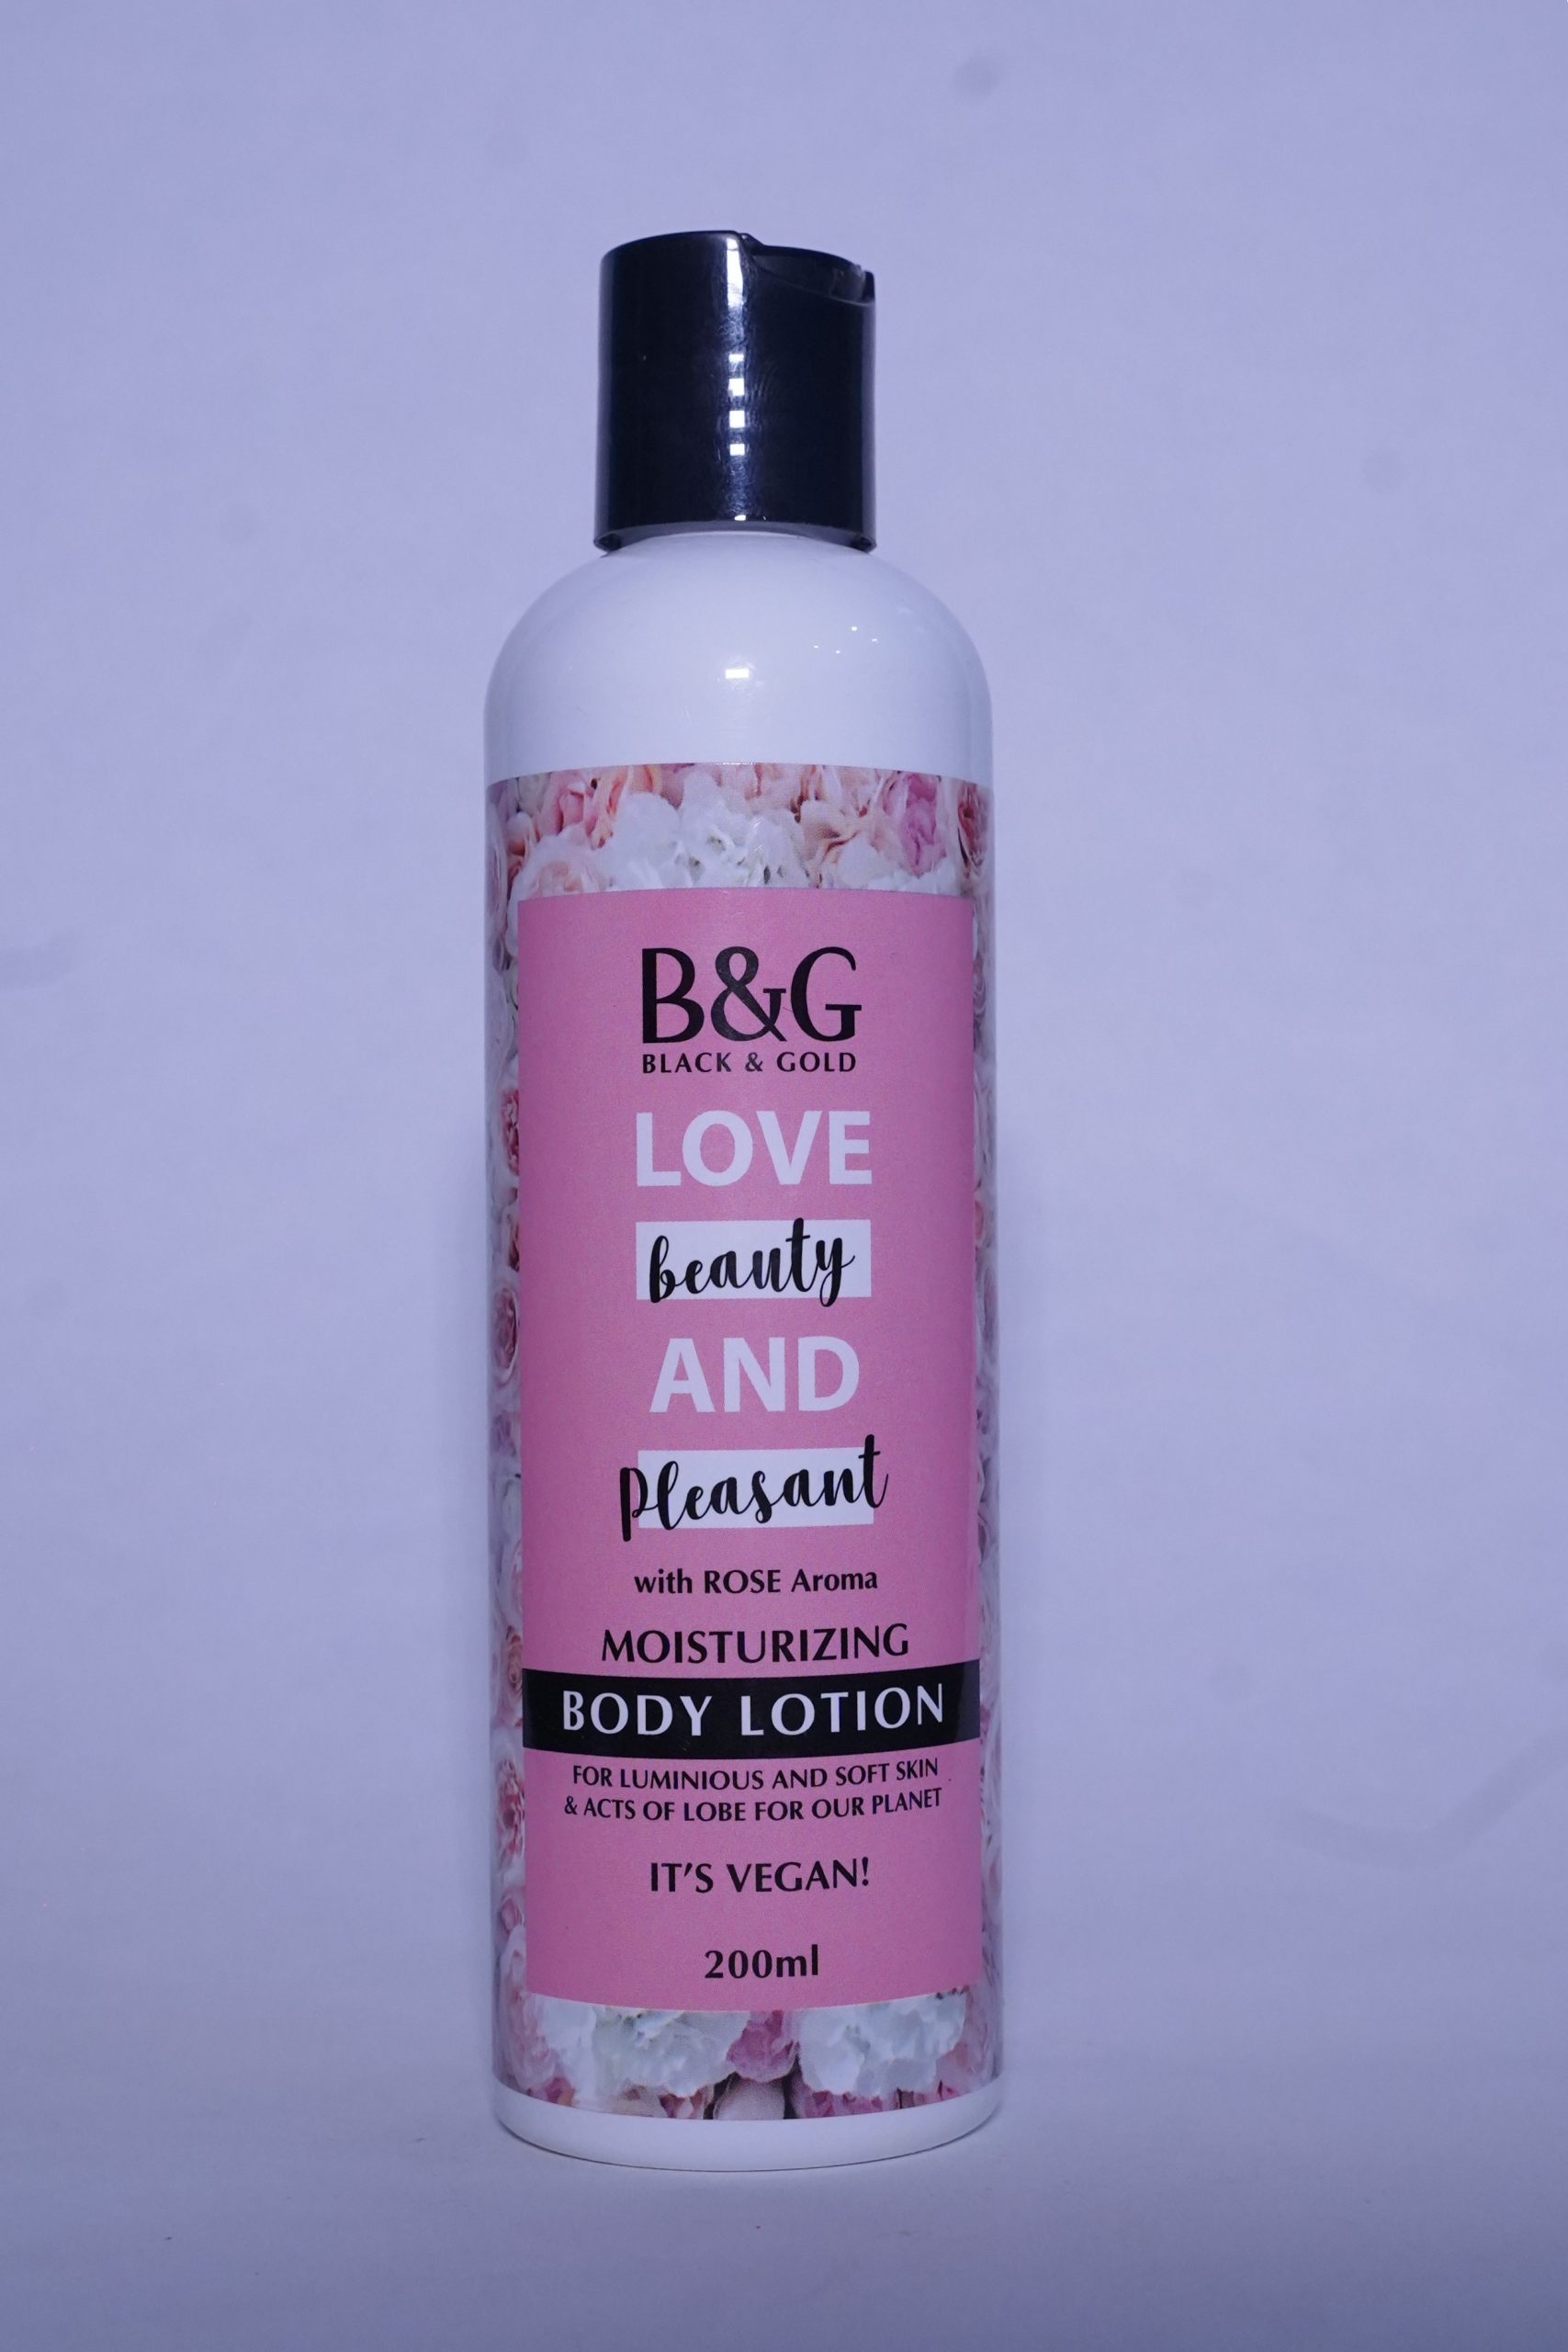 Love Beauty and Pleasant with ROSE Aroma Moisturizing Body Lotion